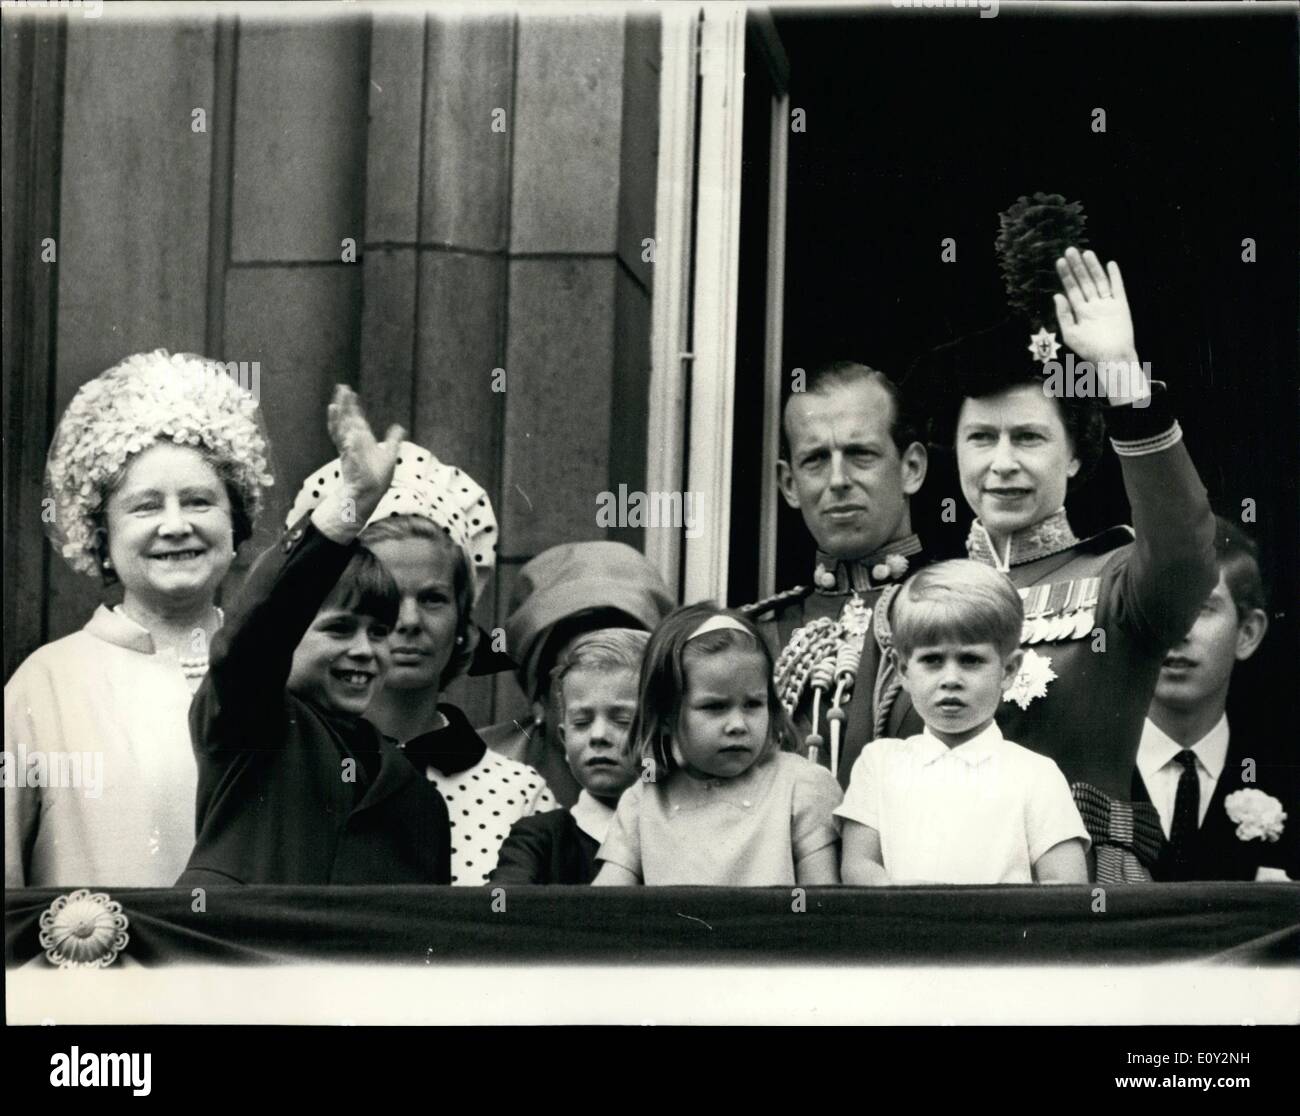 Jun. 06, 1968 - H.M. Queen And Members Of The Royal Family On The Balcony: H.M. The Queen with other members of the Royal family appeared on the Balcony of Buckingham Palace to wave to the crowd after the Trooping ceremony to celebrate the official birthday of the Queen. The fly past had to be cancelled owing to bad weather. Photo shows H.M. The Queen waves from the balcony to the crowd with other members of the royal family. L-R. Queen Mother, Prince Andrew waving, behind is the Duchess of Kent, her two children The Earl of St Stock Photo